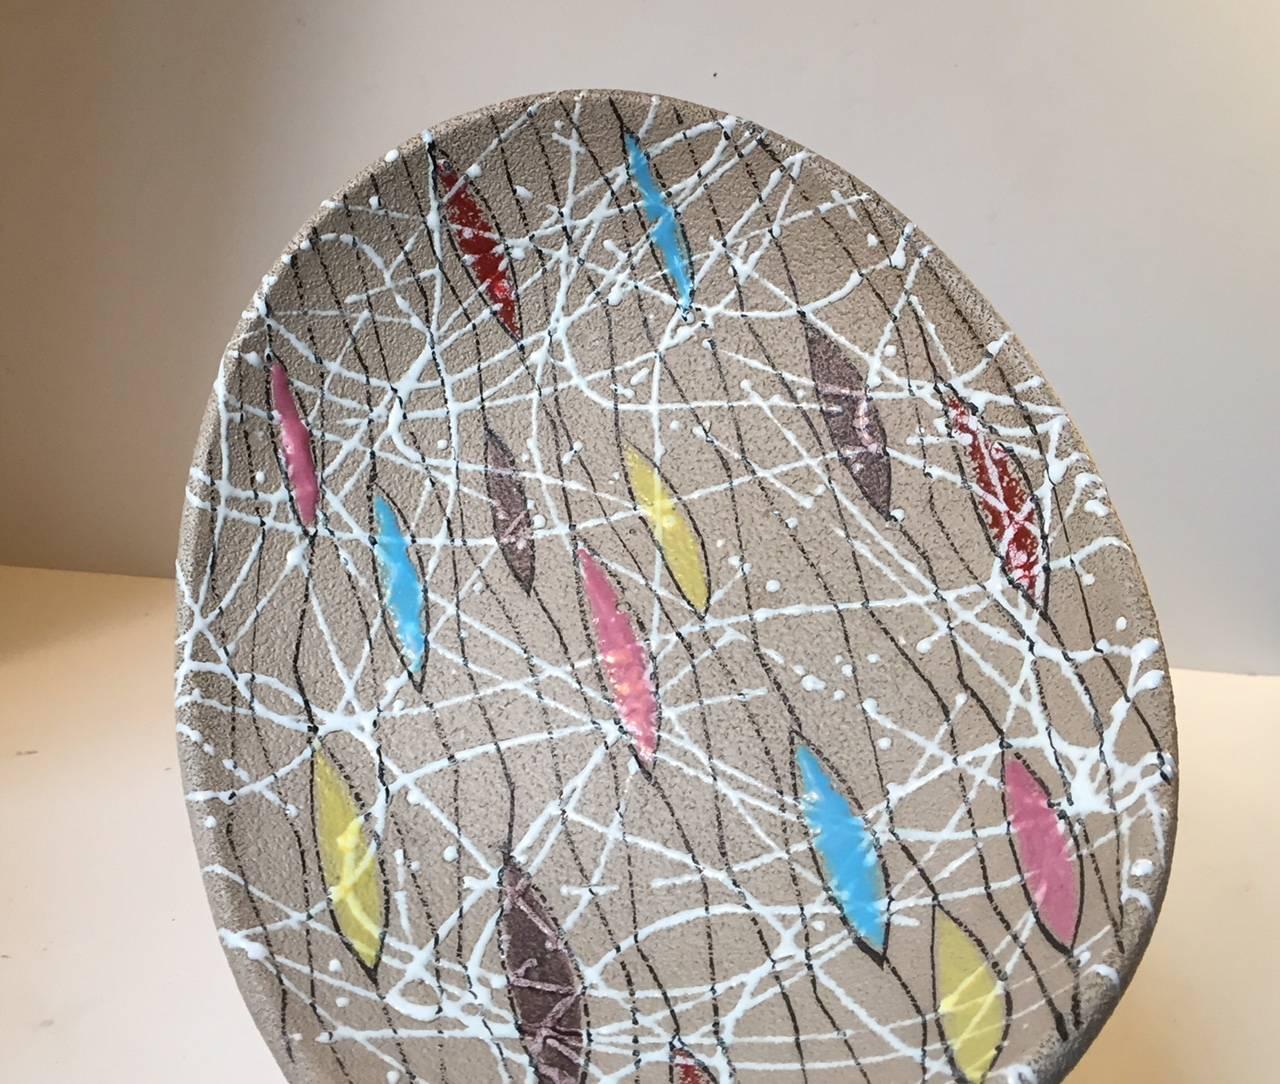 - Modernist Italian ceramic bowl made by Fratelli Fanciullacci with sgrafitto and multicolored leaves
- Surface partly rough, partly glazed in bright colors
- No damages
- Manufactured by Bitossi during the 1950s.